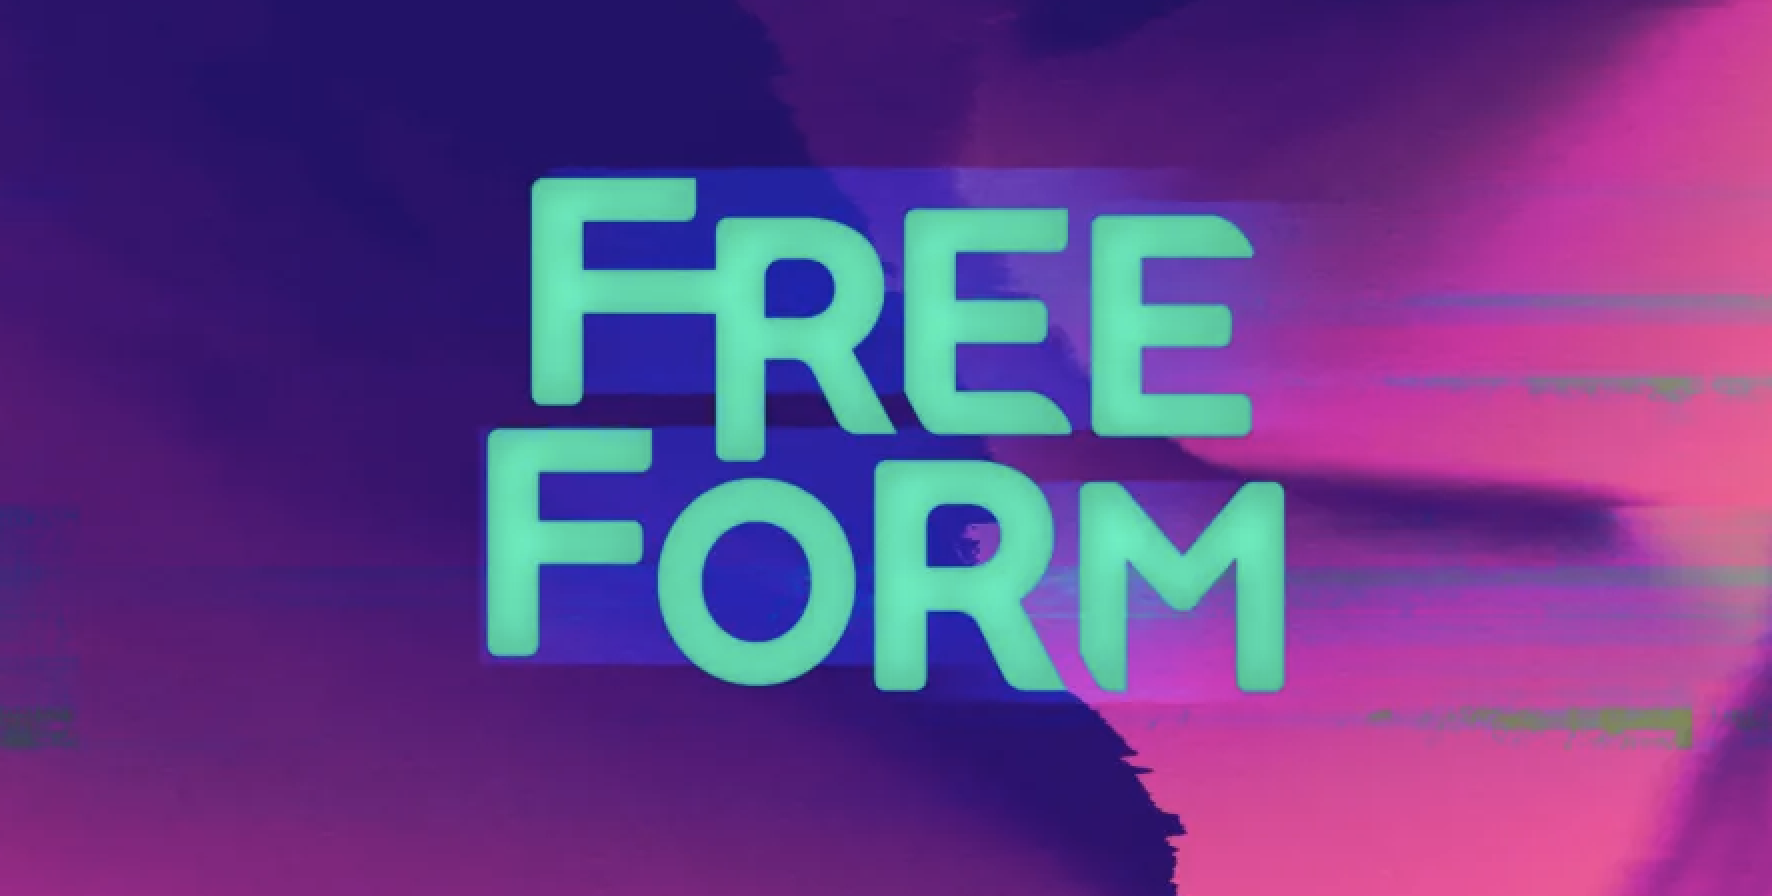 Freeform's Summer Slate is Sizzling with New Seasons of Your Favorite Shows